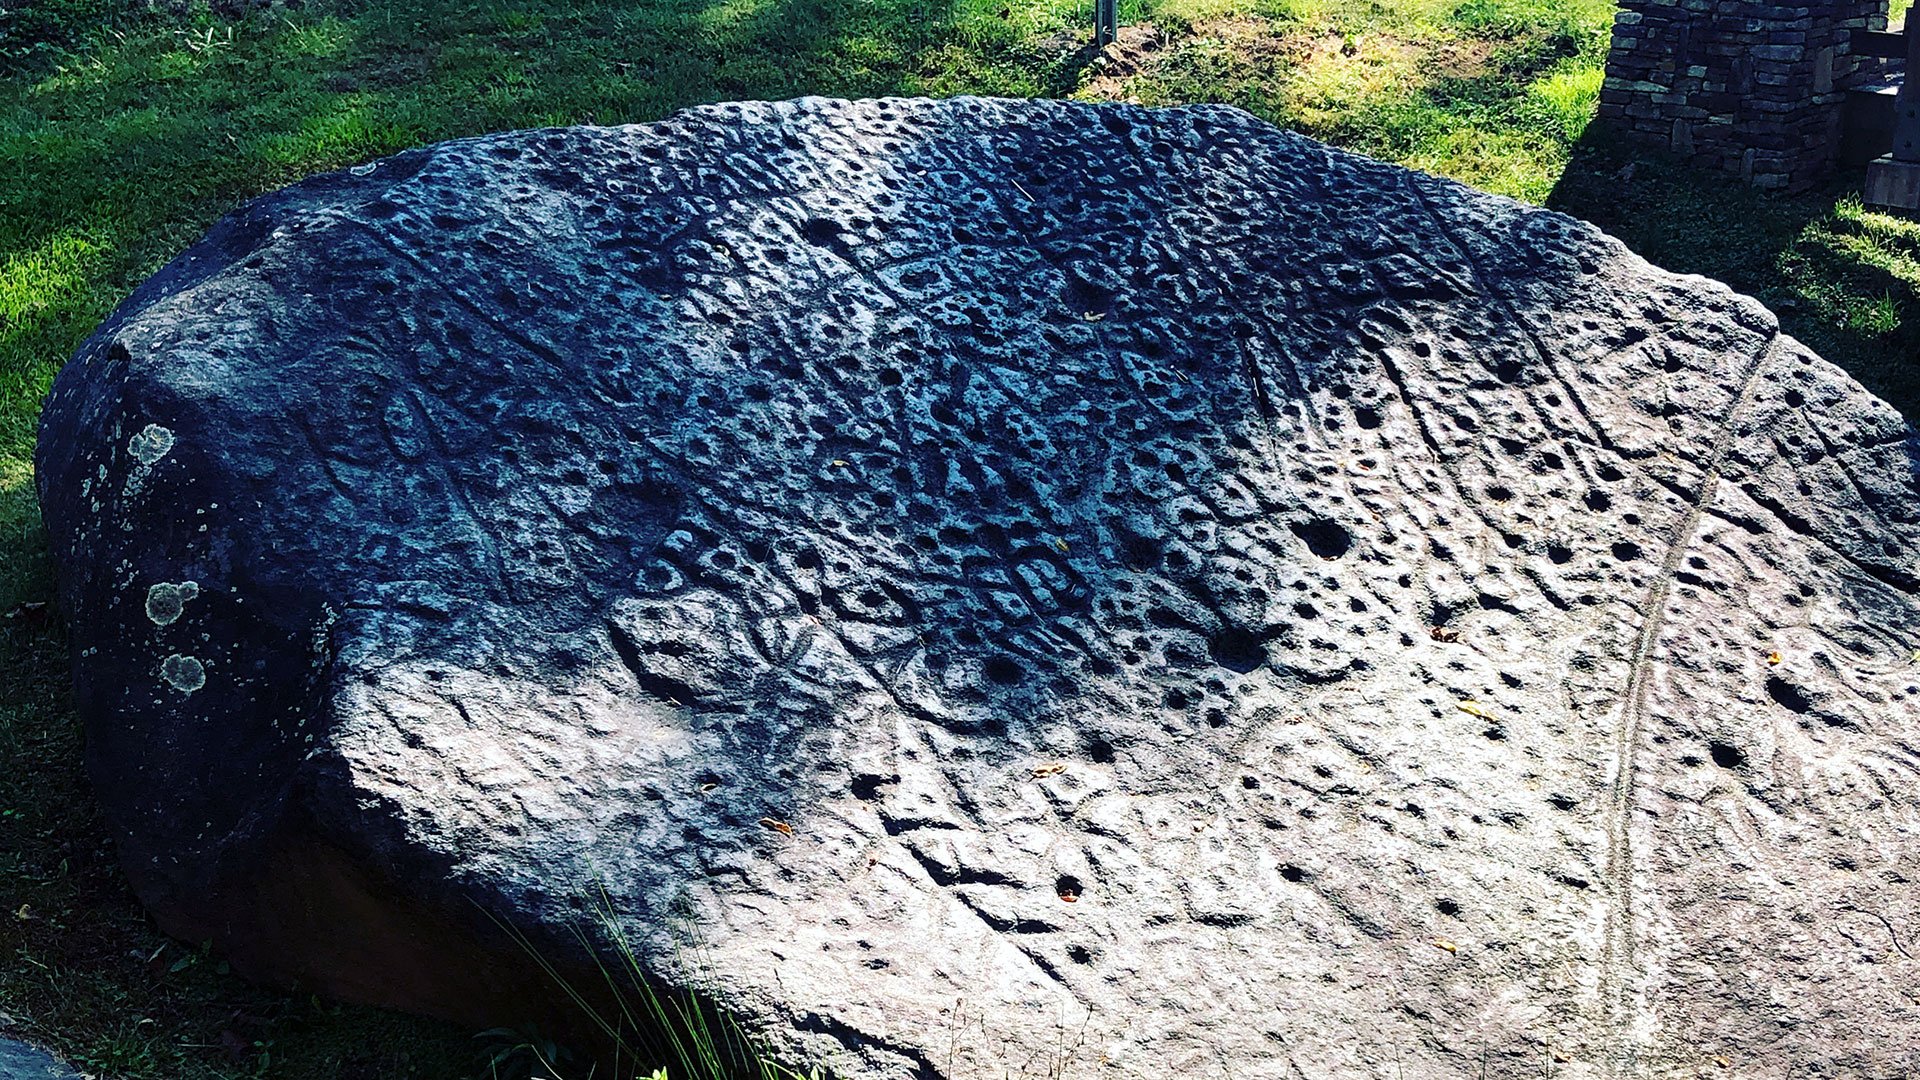 The petroglyphs on Judaculla Rock in Jackson County, North Carolina date back to between 200 and 1400 AD.